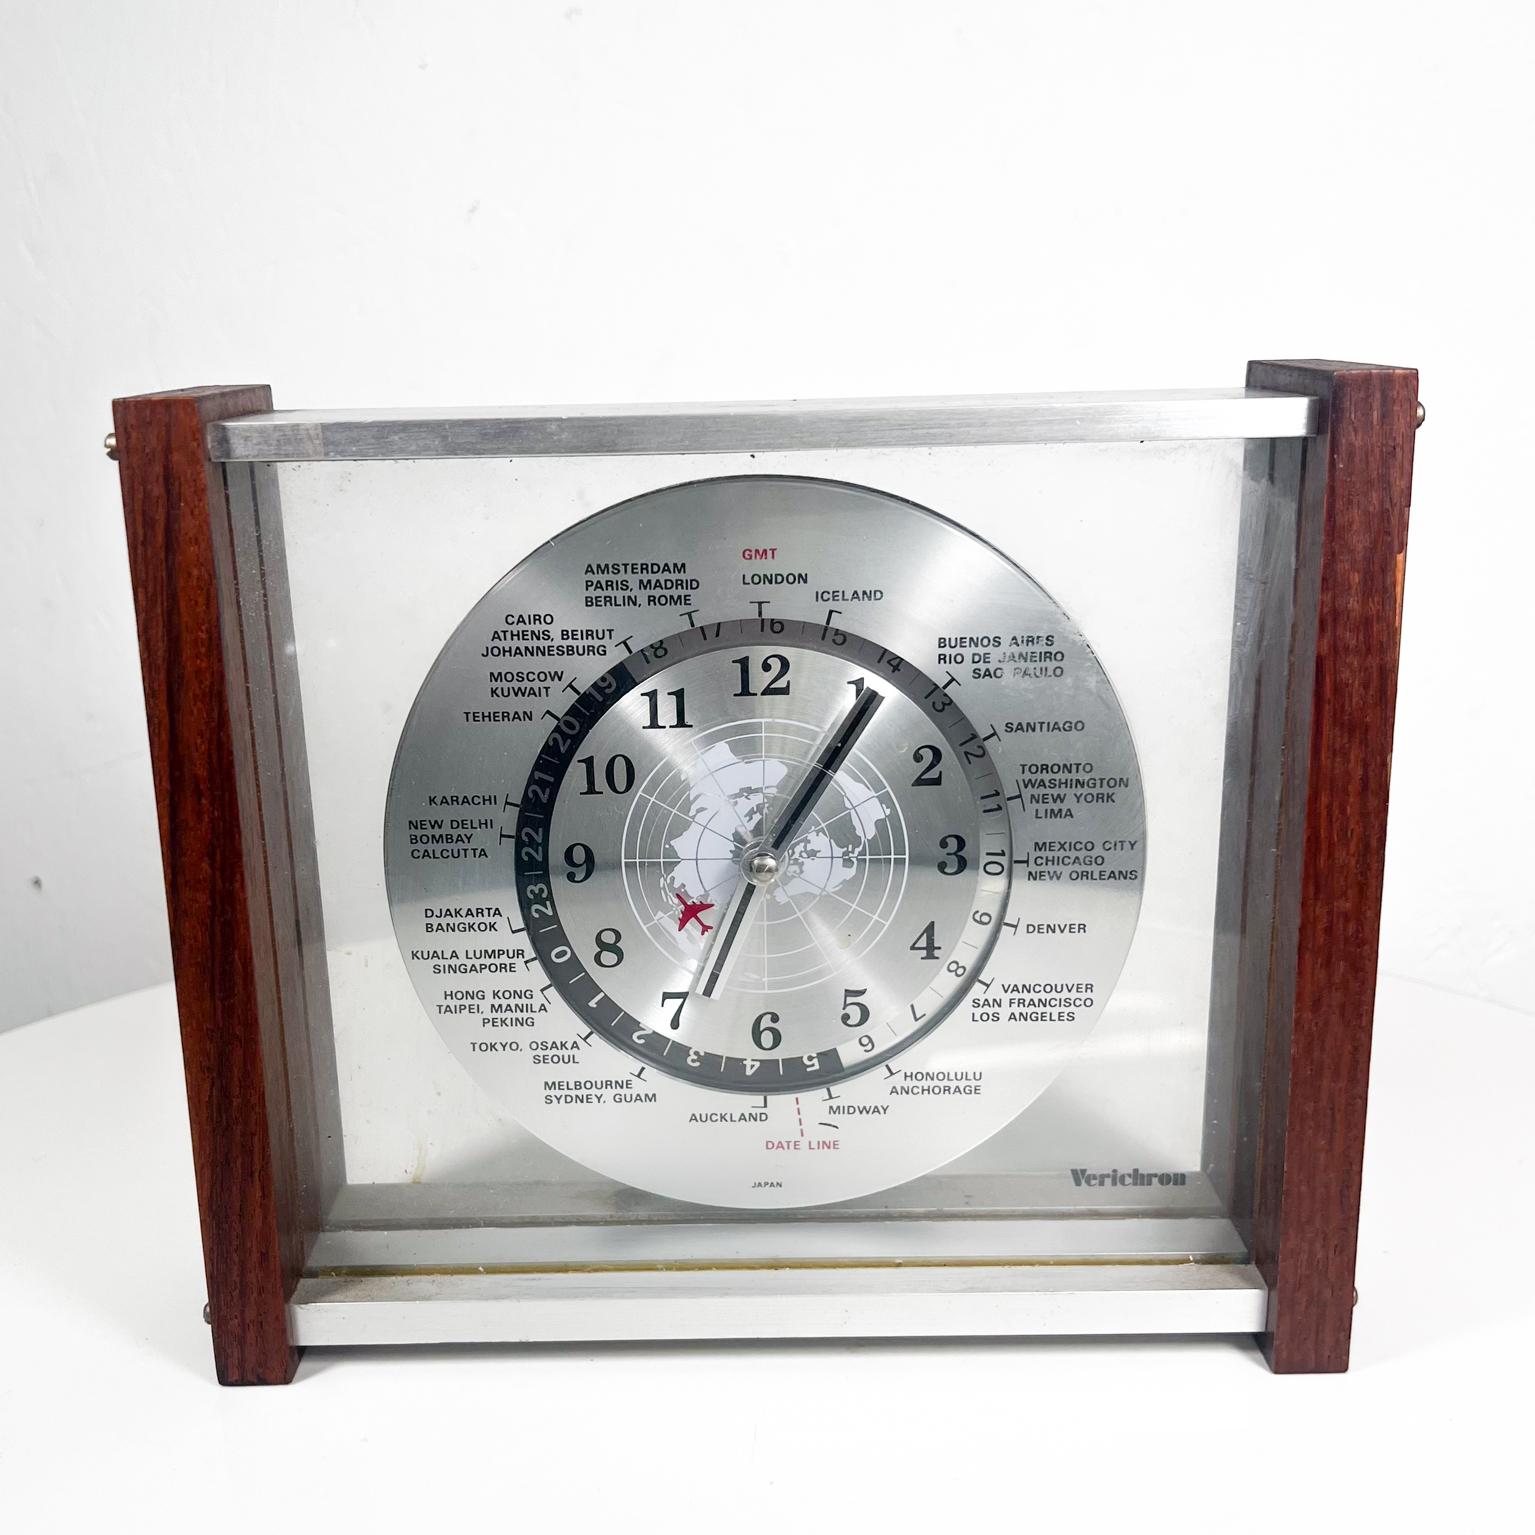 1960s Modern International Table CLOCK Verichron nonworking
Decorative Clock by Verichron
produced by Harris & Mallow Clock Company New Jersey
9.5 w x 3.13 d x 7.88 h
Tested, not working may need a new movement.
Original Unrestored vintage